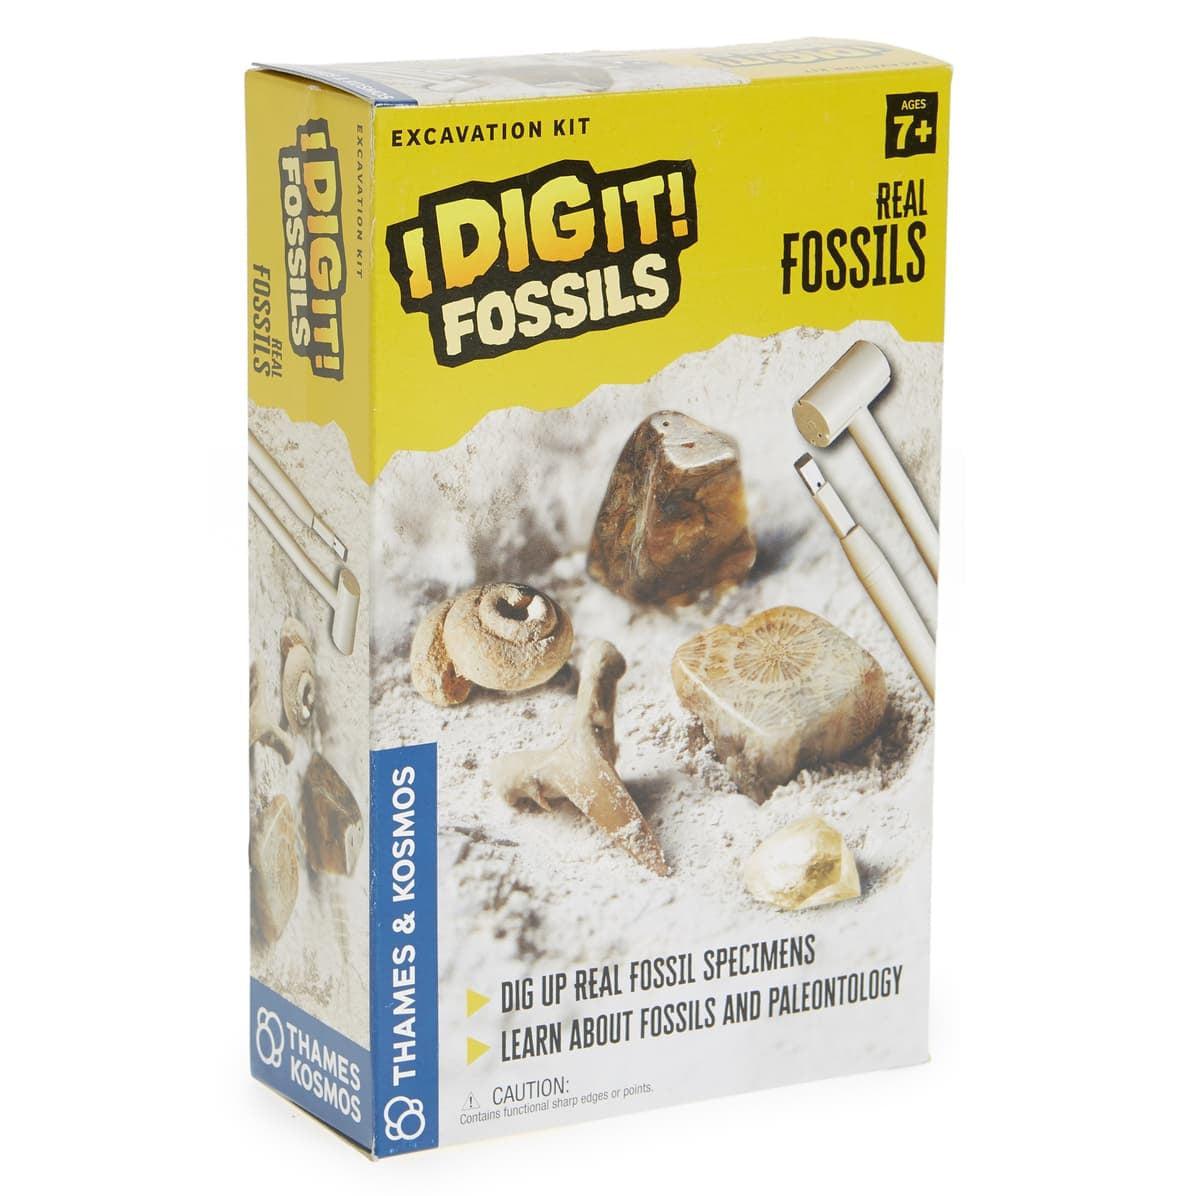 Thames & Kosmos-I Dig It! Fossils - Real Fossils Excavation Kit-630461-Legacy Toys